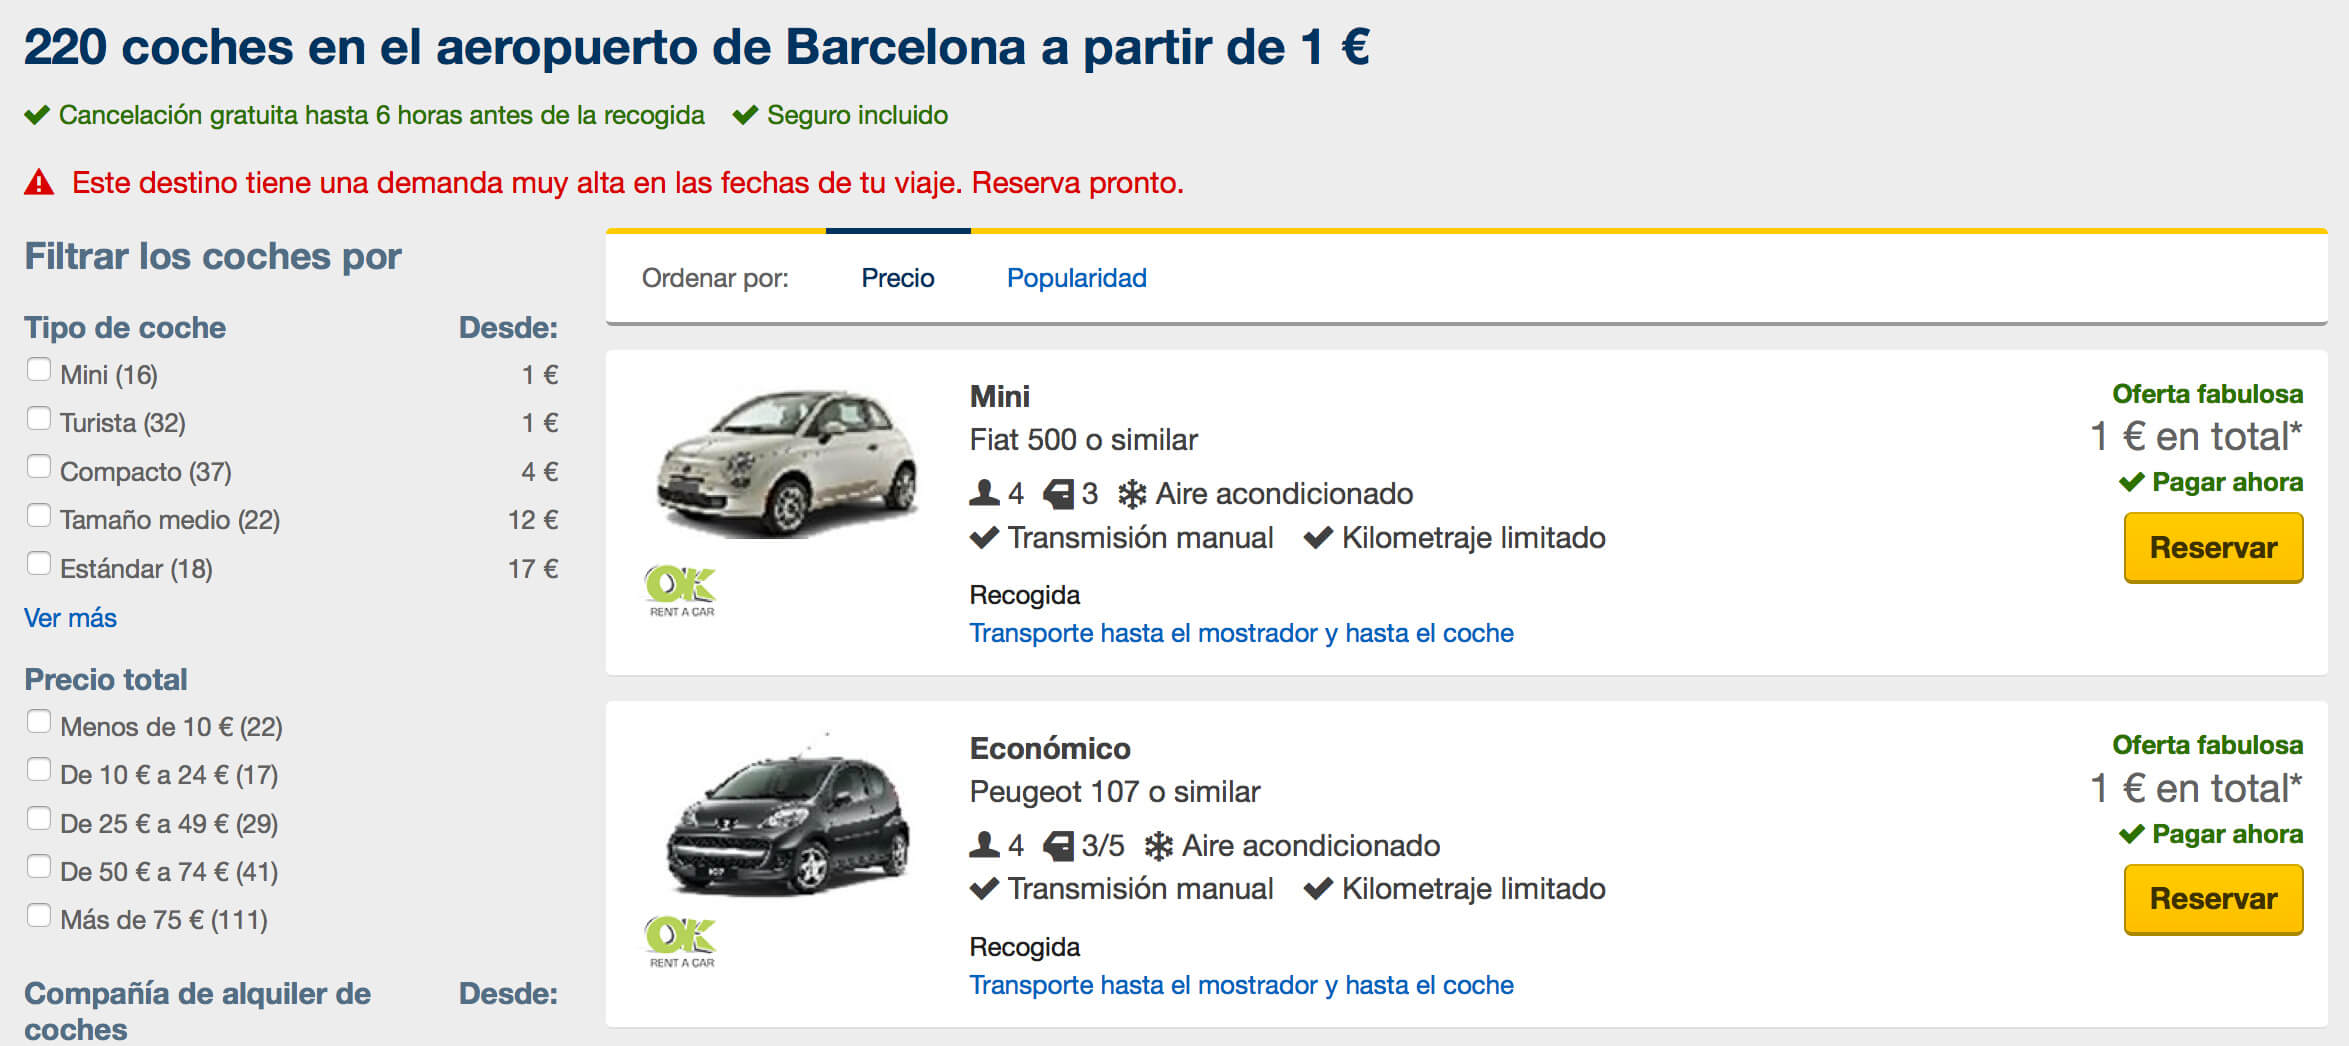 Coche.png(1)